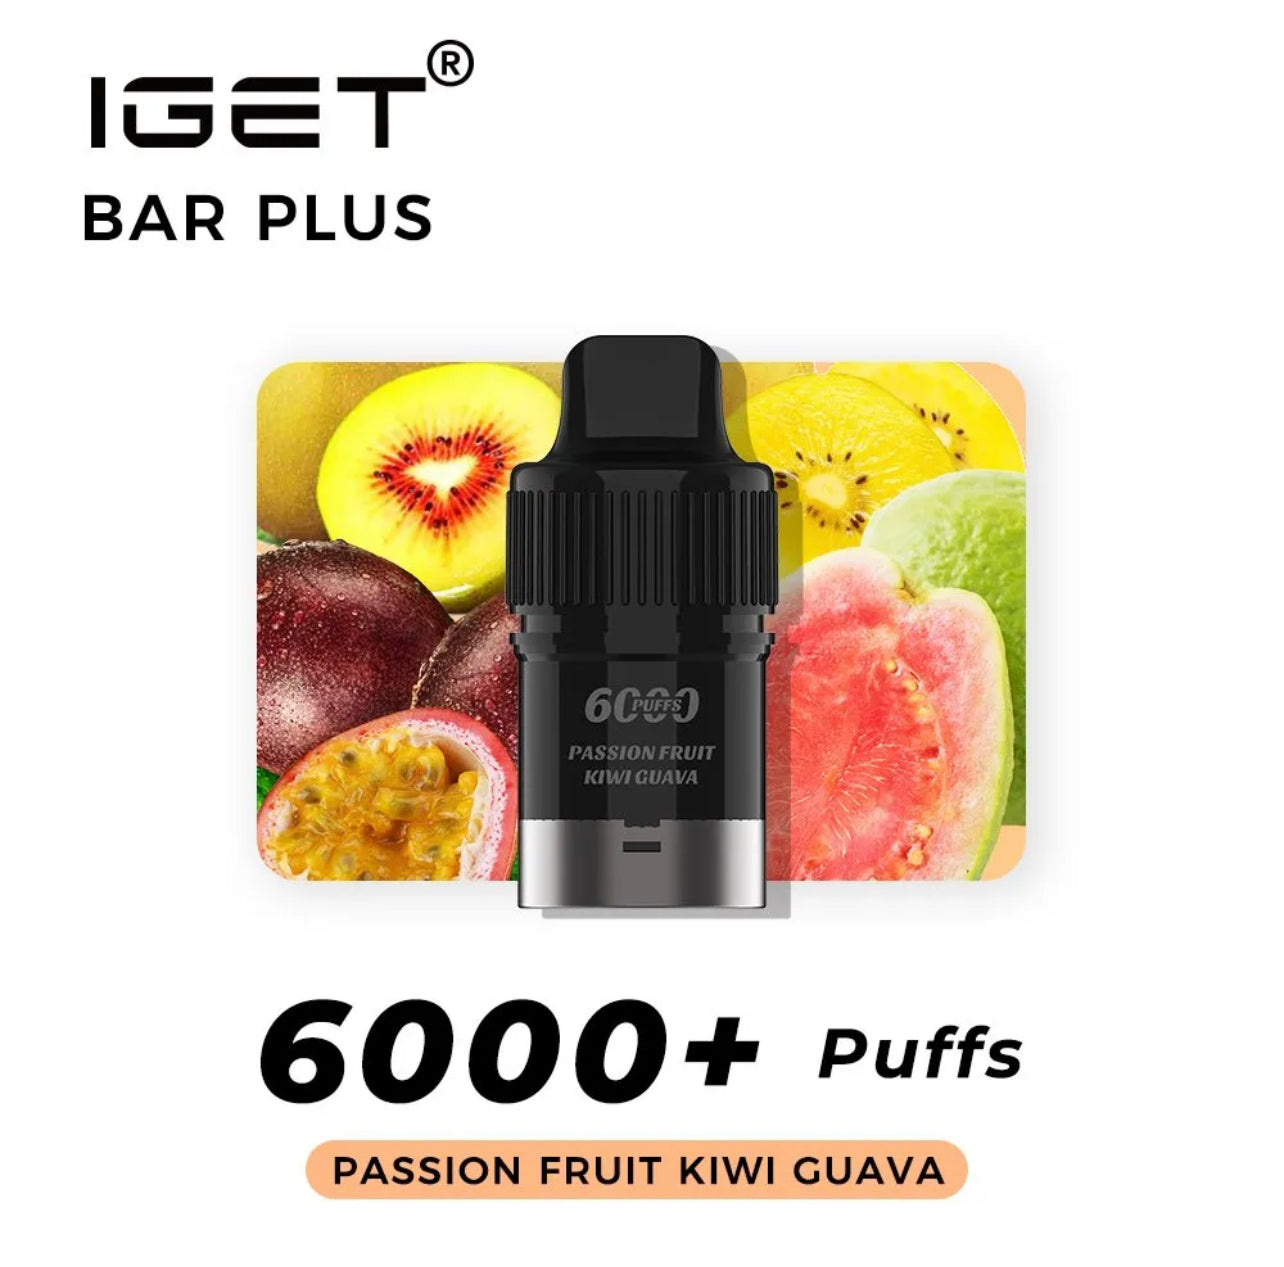 PASSION FRUIT KIWI GUAVA POD ONLY 6000 PUFFS